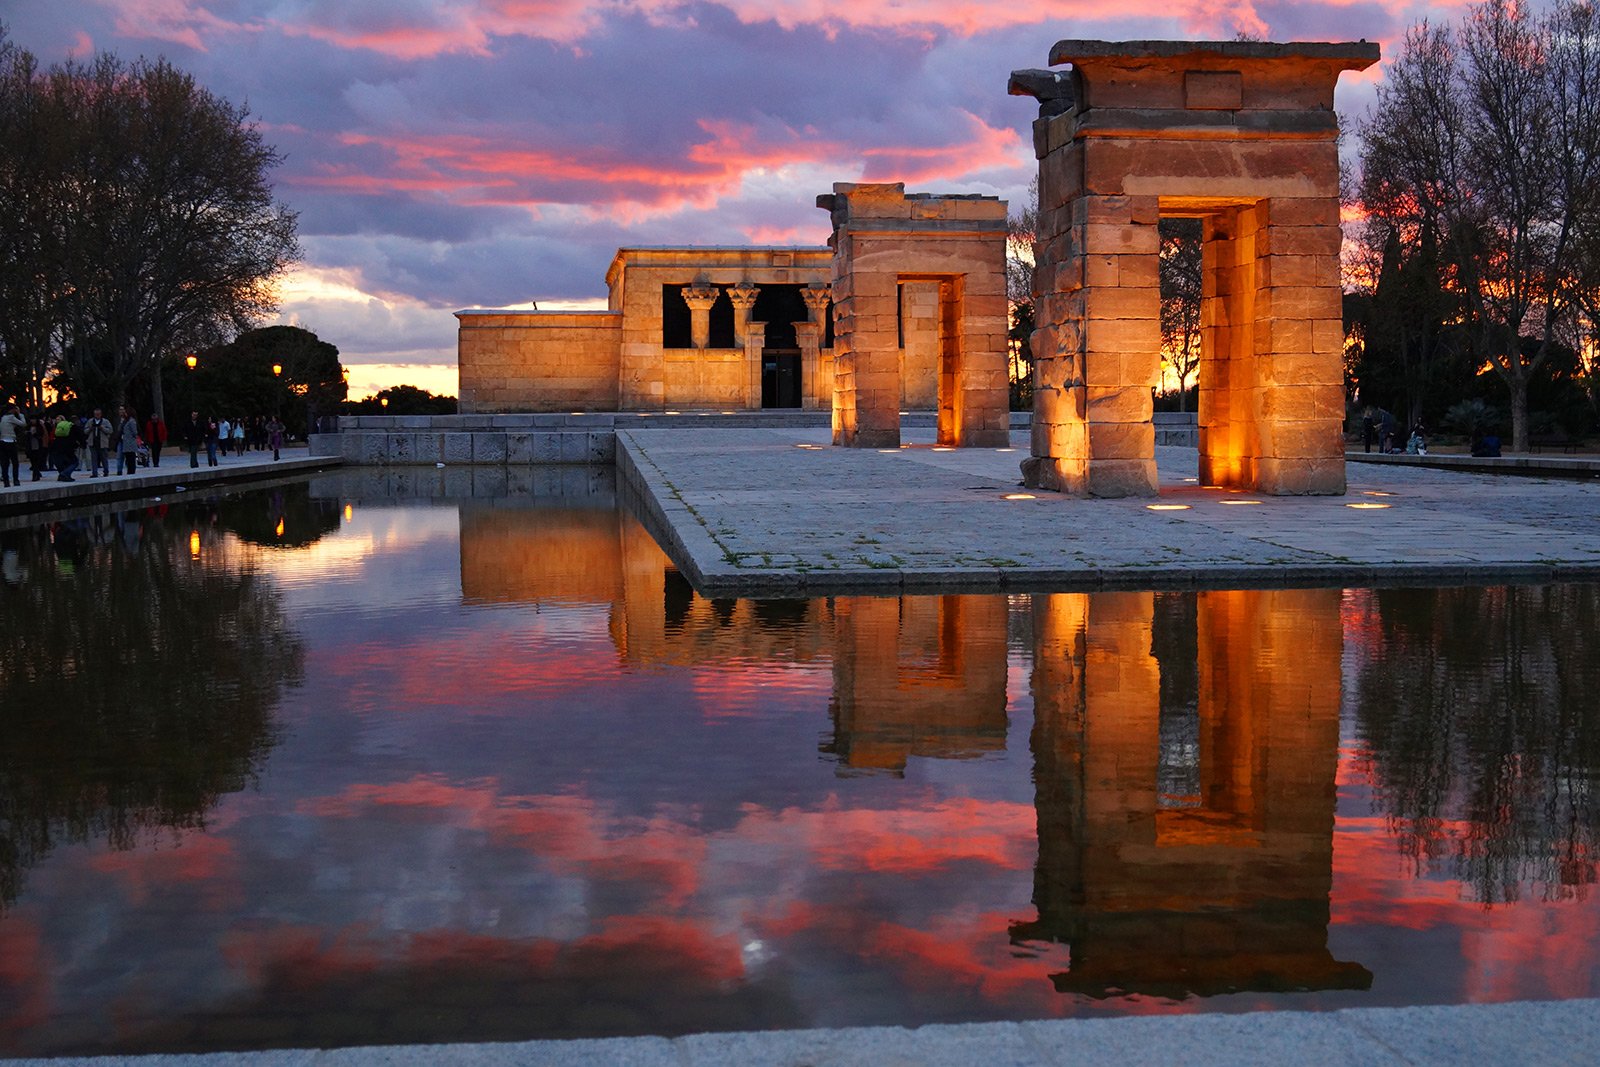 How to see the sunset on the observation deck of the Egyptian temple in Madrid